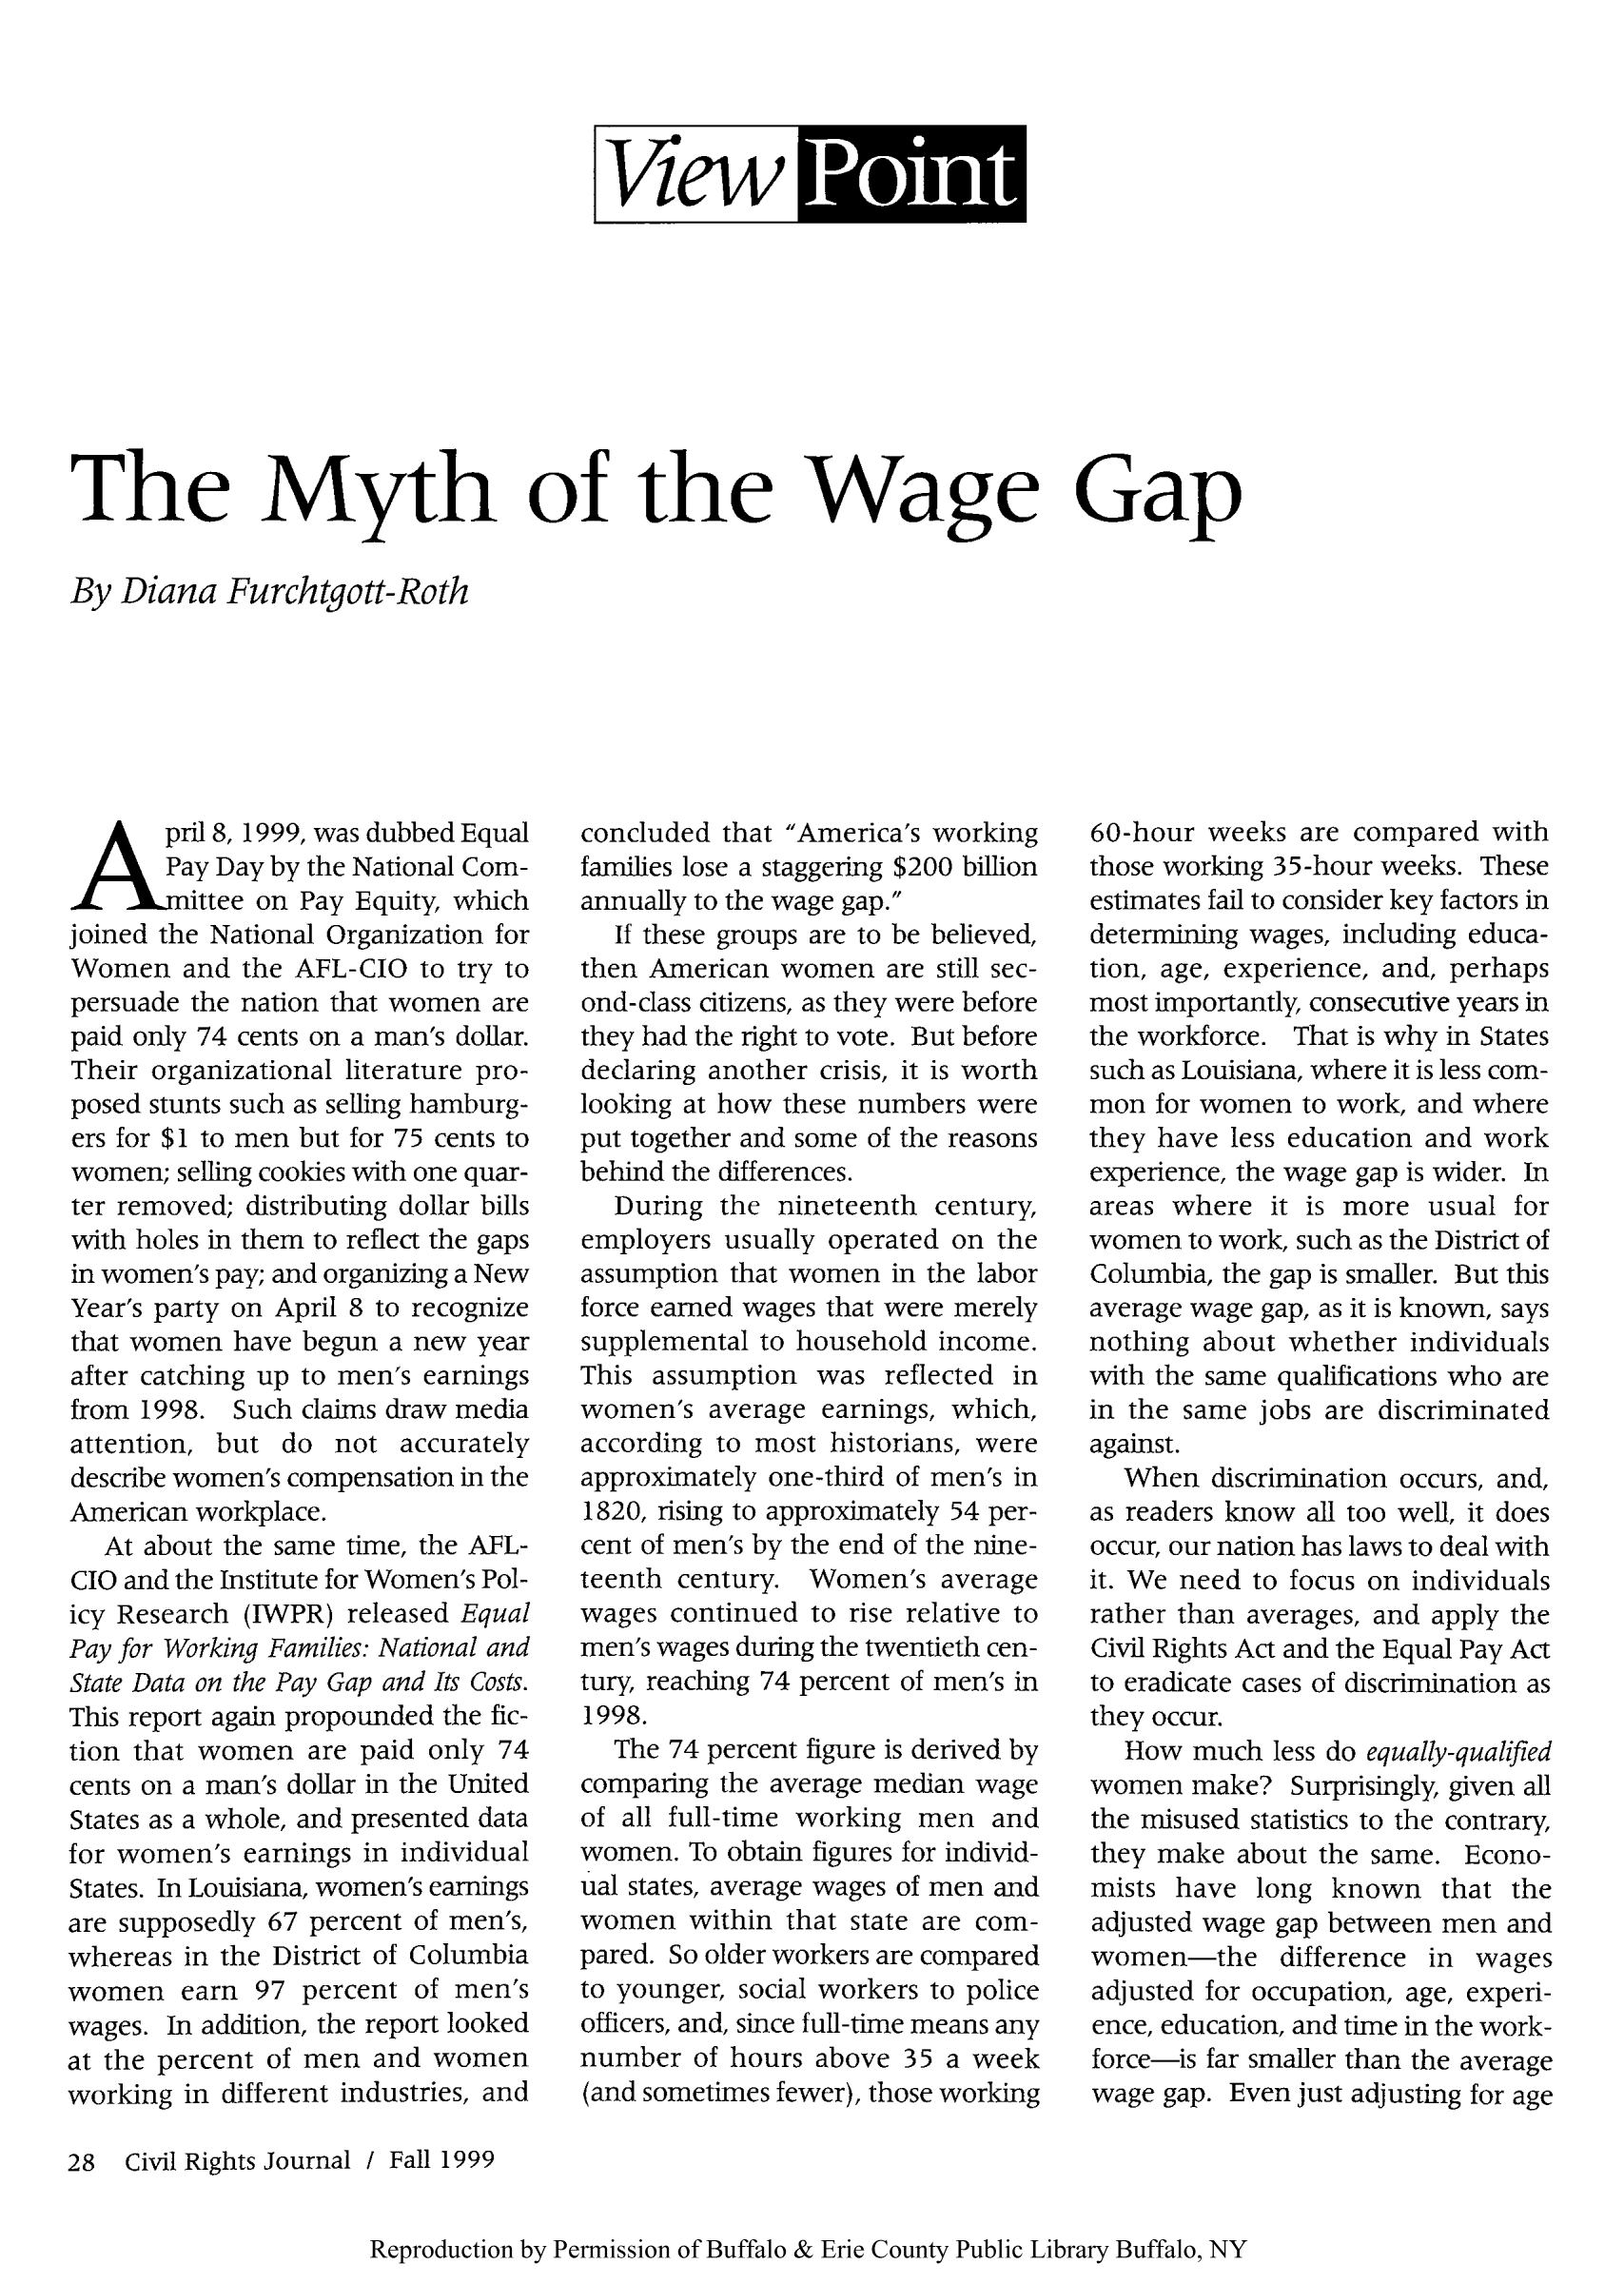 handle is hein.journals/civrigj4 and id is 30 raw text is: VhwkIrlM

The Myth of the Wage Gap
By Diana Furchtgott-Roth

pril 8, 1999, was dubbed Equal
Pay Day by the National Com-
ittee on Pay Equity, which
joined the National Organization for
Women and the AFL-CIO to try to
persuade the nation that women are
paid only 74 cents on a man's dollar.
Their organizational literature pro-
posed stunts such as selling hamburg-
ers for $1 to men but for 75 cents to
women; selling cookies with one quar-
ter removed; distributing dollar bills
with holes in them to reflect the gaps
in women's pay; and organizing a New
Year's party on April 8 to recognize
that women have begun a new year
after catching up to men's earnings
from 1998. Such claims draw media
attention, but do not accurately
describe women's compensation in the
American workplace.
At about the same time, the AFL-
CIO and the Institute for Women's Pol-
icy Research (IWPR) released Equal
Pay for Working Families: National and
State Data on the Pay Gap and Its Costs.
This report again propounded the fic-
tion that women are paid only 74
cents on a man's dollar in the United
States as a whole, and presented data
for women's earnings in individual
States. In Louisiana, women's earnings
are supposedly 67 percent of men's,
whereas in the District of Columbia
women earn 97 percent of men's
wages. In addition, the report looked
at the percent of men and women
working in different industries, and
28 Civil Rights Journal / Fall 1999

concluded that America's working
families lose a staggering $200 billion
annually to the wage gap.
If these groups are to be believed,
then American women are still sec-
ond-class citizens, as they were before
they had the right to vote. But before
declaring another crisis, it is worth
looking at how these numbers were
put together and some of the reasons
behind the differences.
During the nineteenth century,
employers usually operated on the
assumption that women in the labor
force earned wages that were merely
supplemental to household income.
This assumption was reflected in
women's average earnings, which,
according to most historians, were
approximately one-third of men's in
1820, rising to approximately 54 per-
cent of men's by the end of the nine-
teenth century. Women's average
wages continued to rise relative to
men's wages during the twentieth cen-
tury, reaching 74 percent of men's in
1998.
The 74 percent figure is derived by
comparing the average median wage
of all full-time working men and
women. To obtain figures for individ-
ual states, average wages of men and
women within that state are com-
pared. So older workers are compared
to younger, social workers to police
officers, and, since full-time means any
number of hours above 35 a week
(and sometimes fewer), those working

60-hour weeks are compared with
those working 35-hour weeks. These
estimates fail to consider key factors in
determining wages, including educa-
tion, age, experience, and, perhaps
most importantly, consecutive years in
the workforce. That is why in States
such as Louisiana, where it is less com-
mon for women to work, and where
they have less education and work
experience, the wage gap is wider. In
areas where it is more usual for
women to work, such as the District of
Columbia, the gap is smaller. But this
average wage gap, as it is known, says
nothing about whether individuals
with the same qualifications who are
in the same jobs are discriminated
against.
When discrimination occurs, and,
as readers know all too well, it does
occur, our nation has laws to deal with
it. We need to focus on individuals
rather than averages, and apply the
Civil Rights Act and the Equal Pay Act
to eradicate cases of discrimination as
they occur.
How much less do equally-qualified
women make? Surprisingly, given all
the misused statistics to the contrary,
they make about the same. Econo-
mists have long known that the
adjusted wage gap between men and
women-the difference in wages
adjusted for occupation, age, experi-
ence, education, and time in the work-
force-is far smaller than the average
wage gap. Even just adjusting for age

Reproduction by Permission of Buffalo & Erie County Public Library Buffalo, NY


